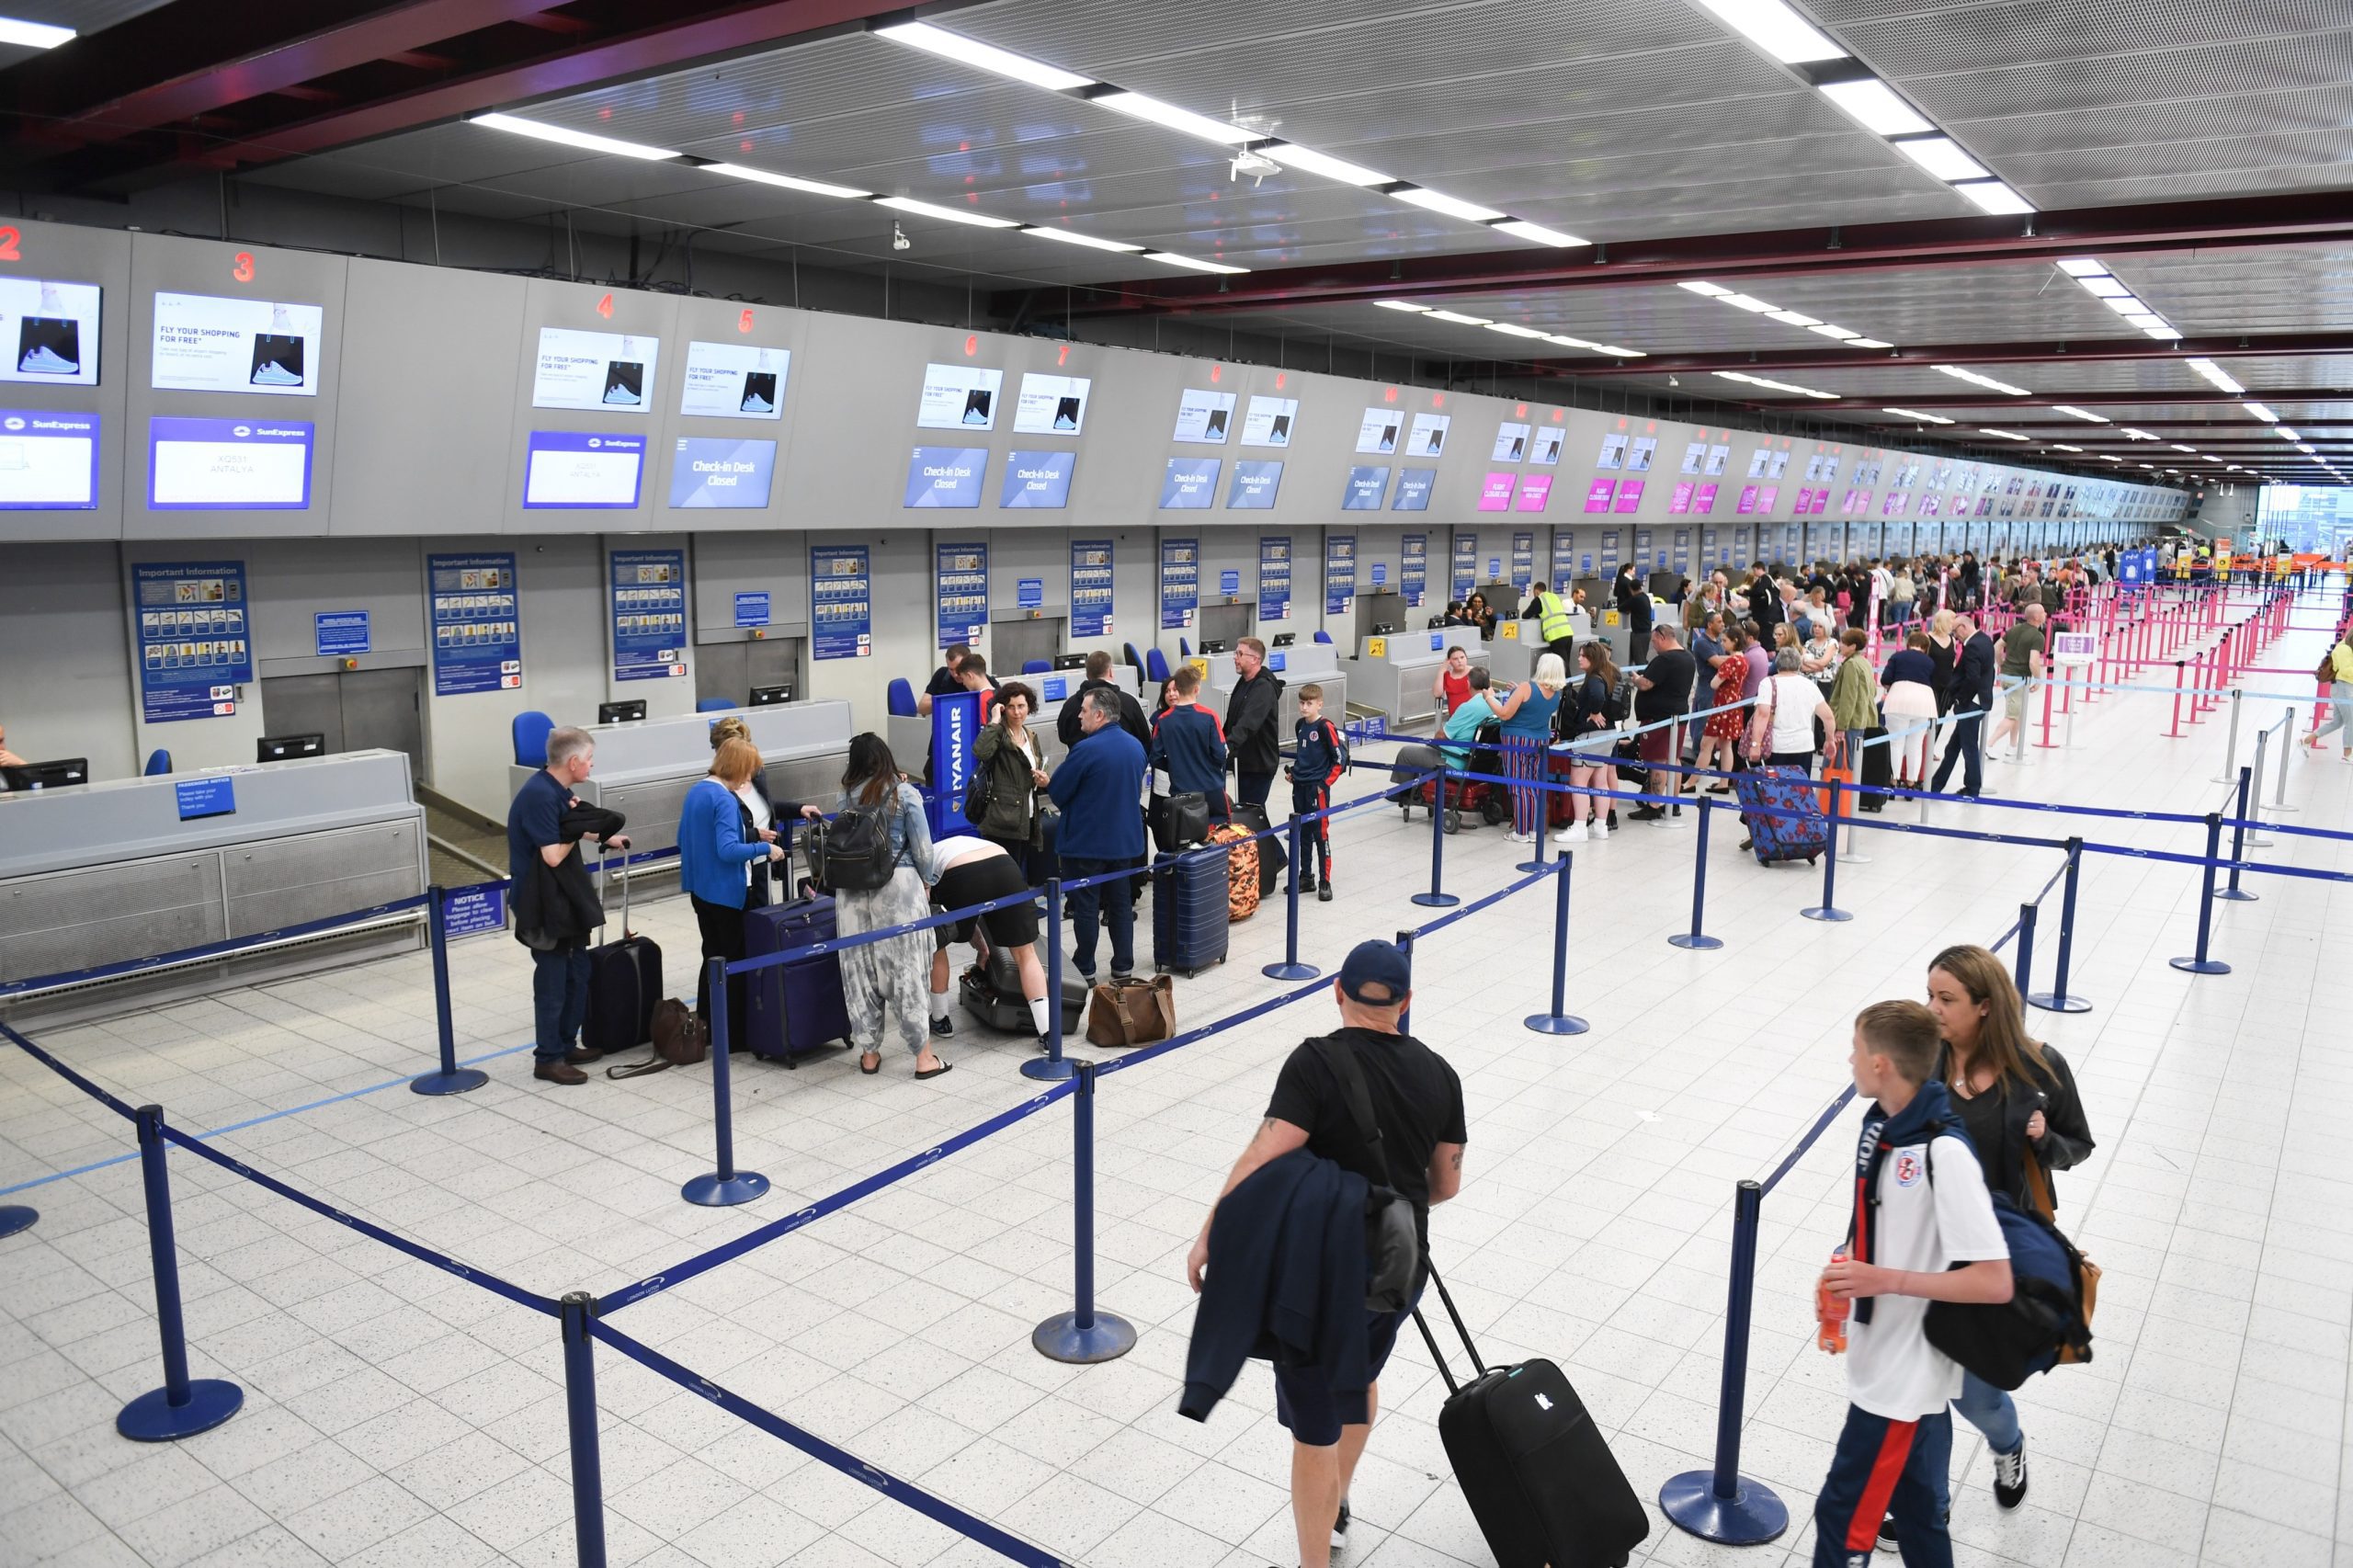 A busy airport check-in area with multiple counters and digital screens. Passengers are standing in line, managing luggage, and waiting to check in. Blue stanchions organize the queues, and staff are assisting travelers. The area is brightly lit.